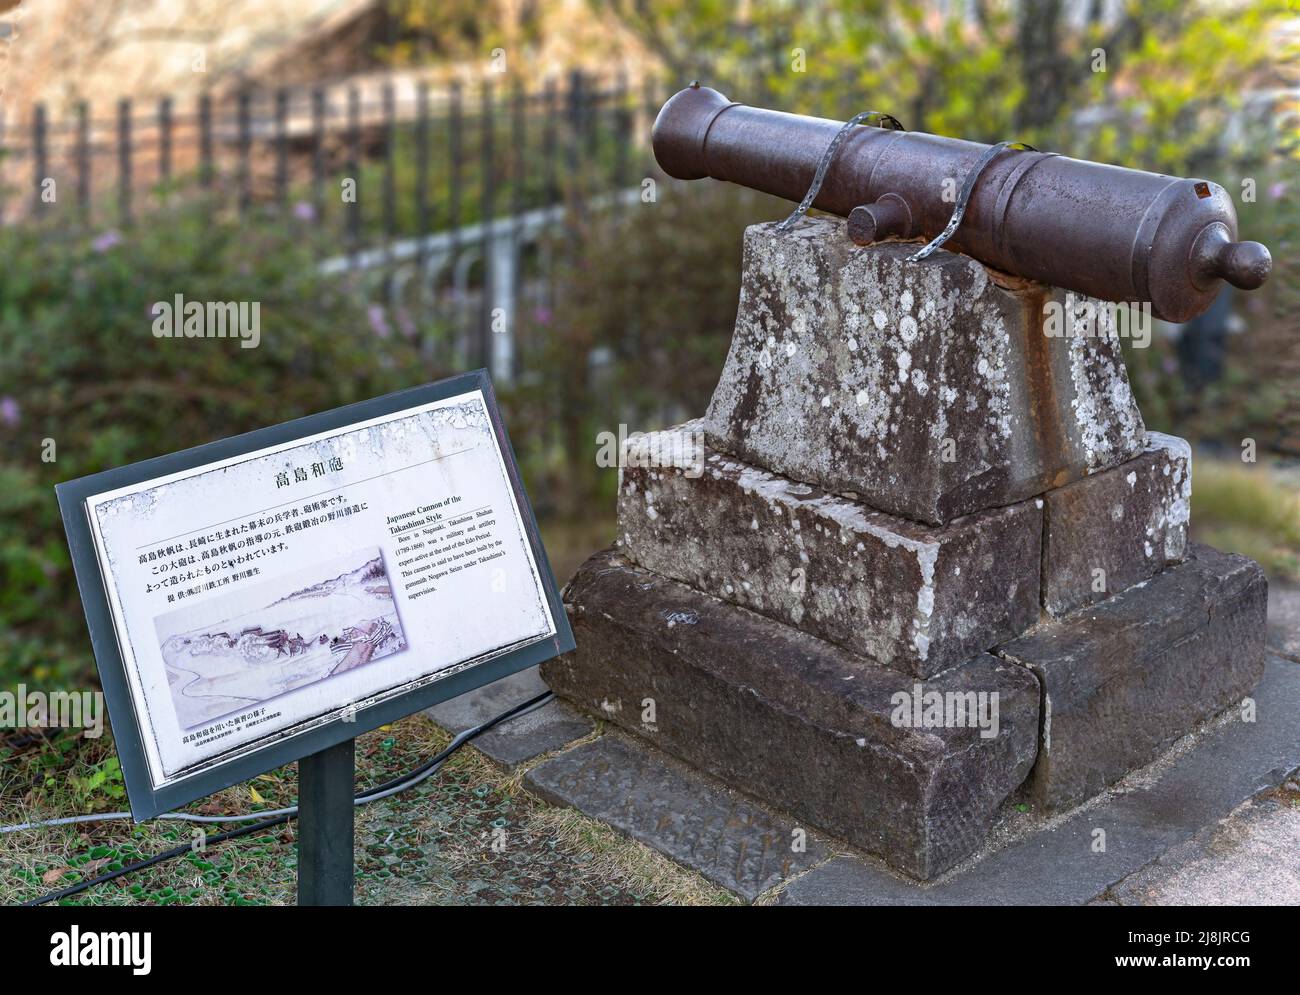 nagasaki, kyushu - december 13 2021: Old and rusted Japanese cannon of the Takashima style dating from the end of the Edo period exhibited on a stone Stock Photo